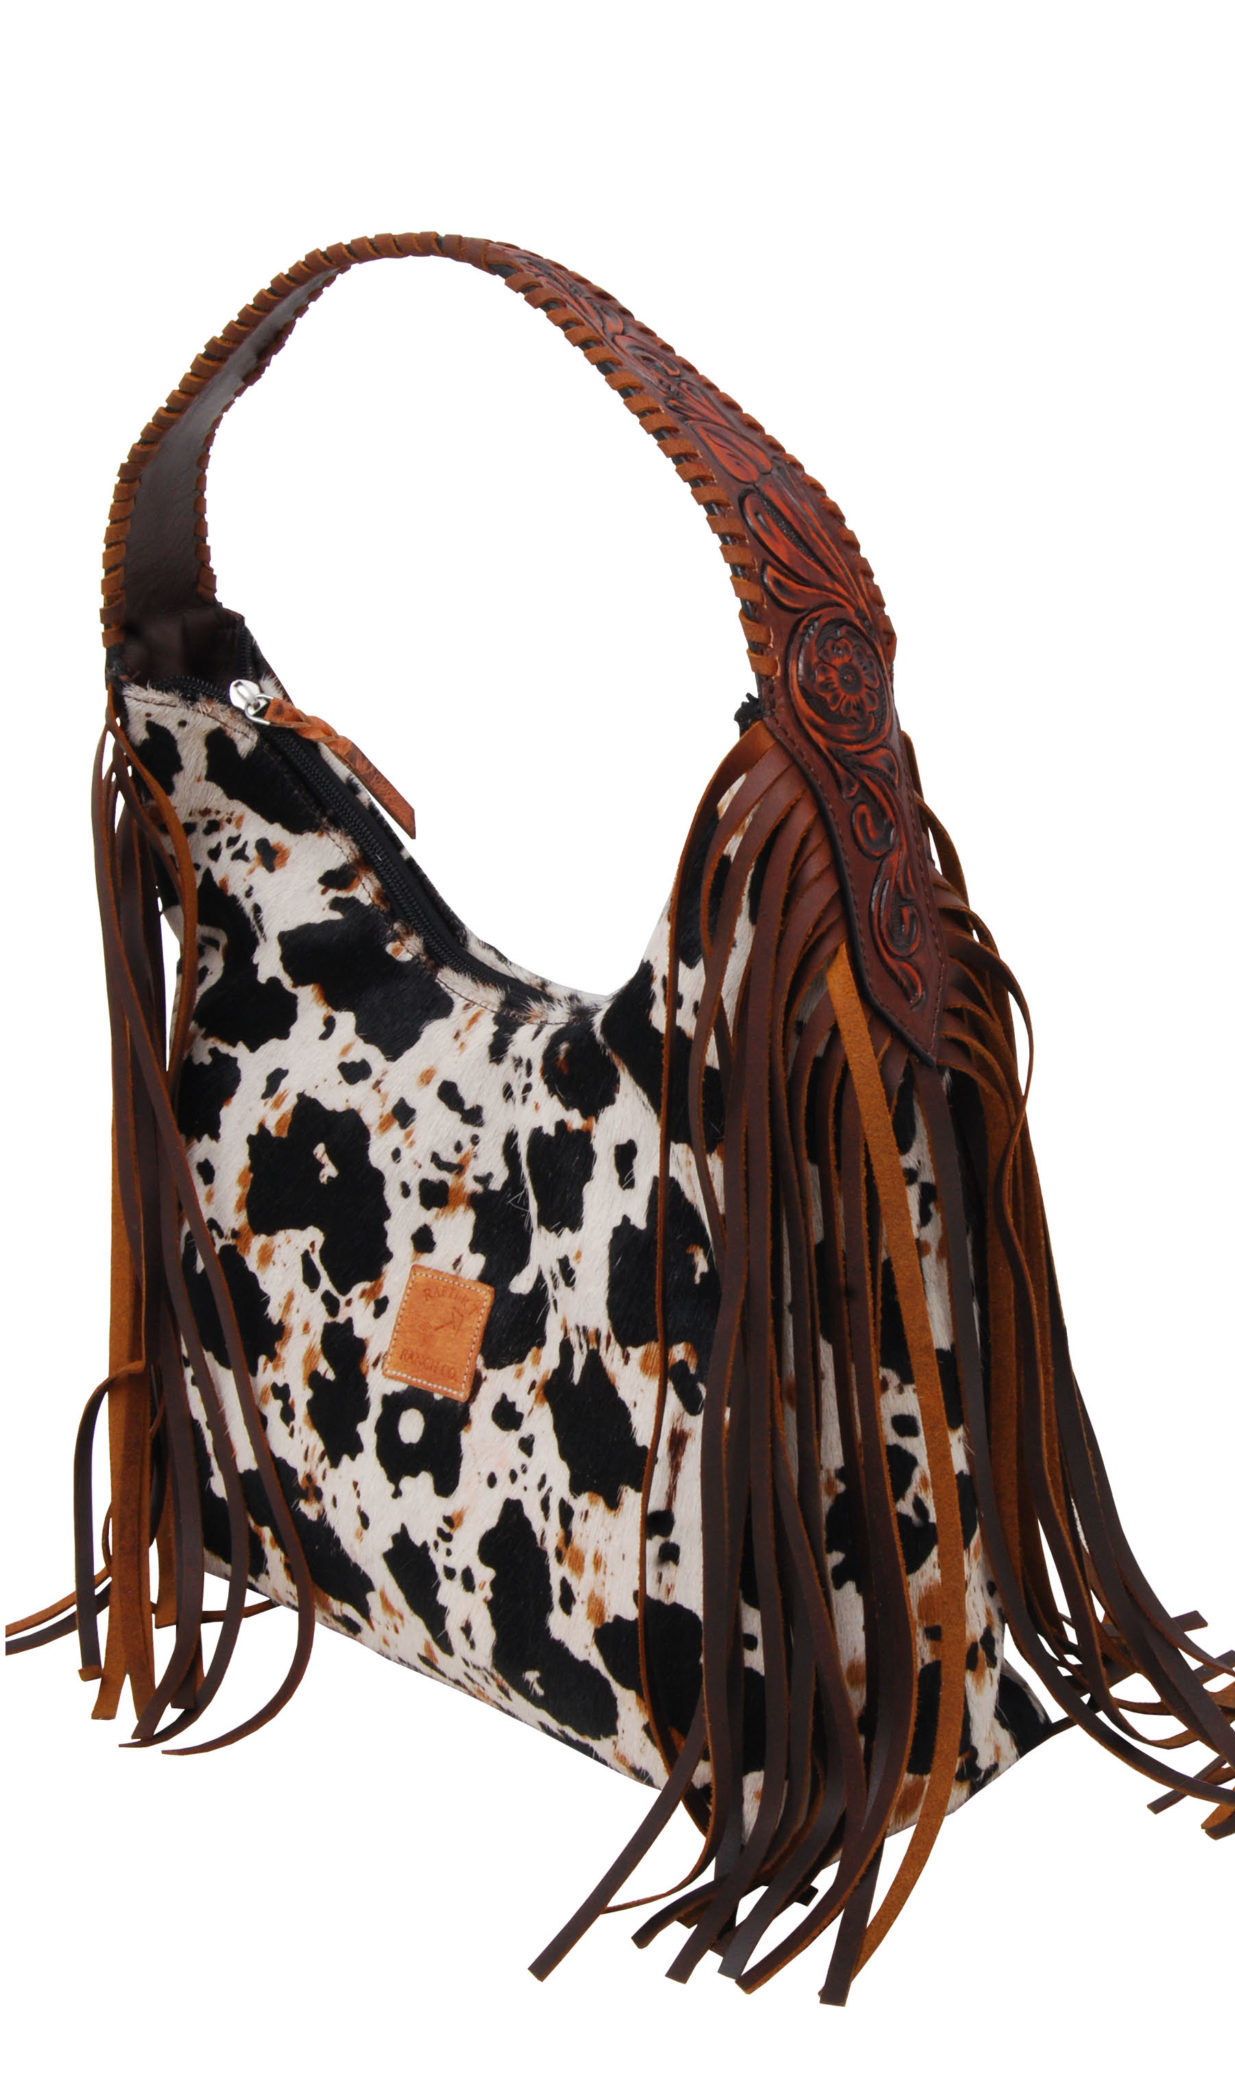 Rafter T Ranch Co. Cowhide Purse